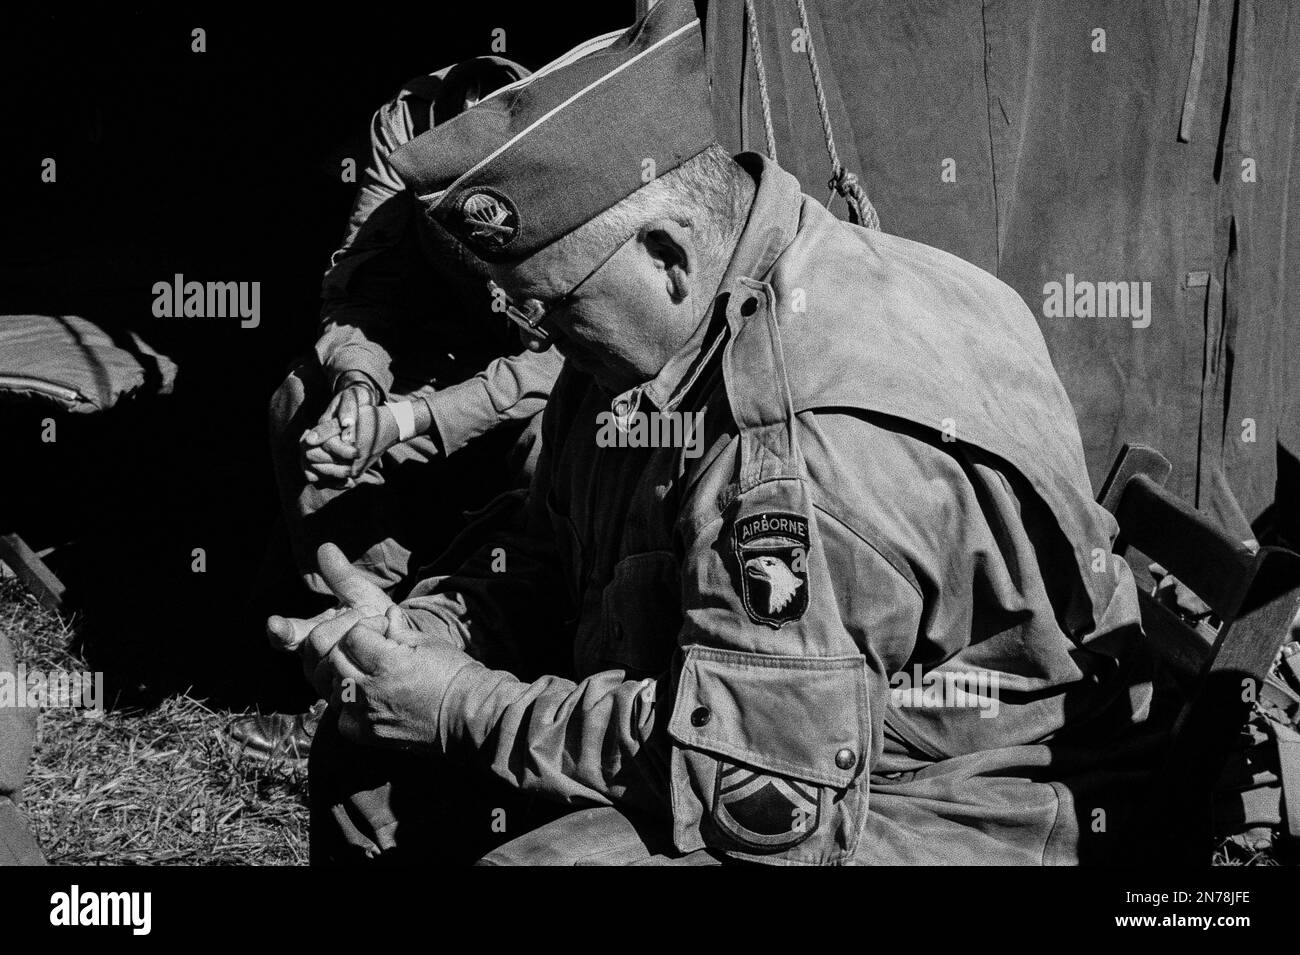 WWII soldiers who looking they are praying under a tent during a reenactment at the American Heritage Museum. The image was captured on analog black a Stock Photo